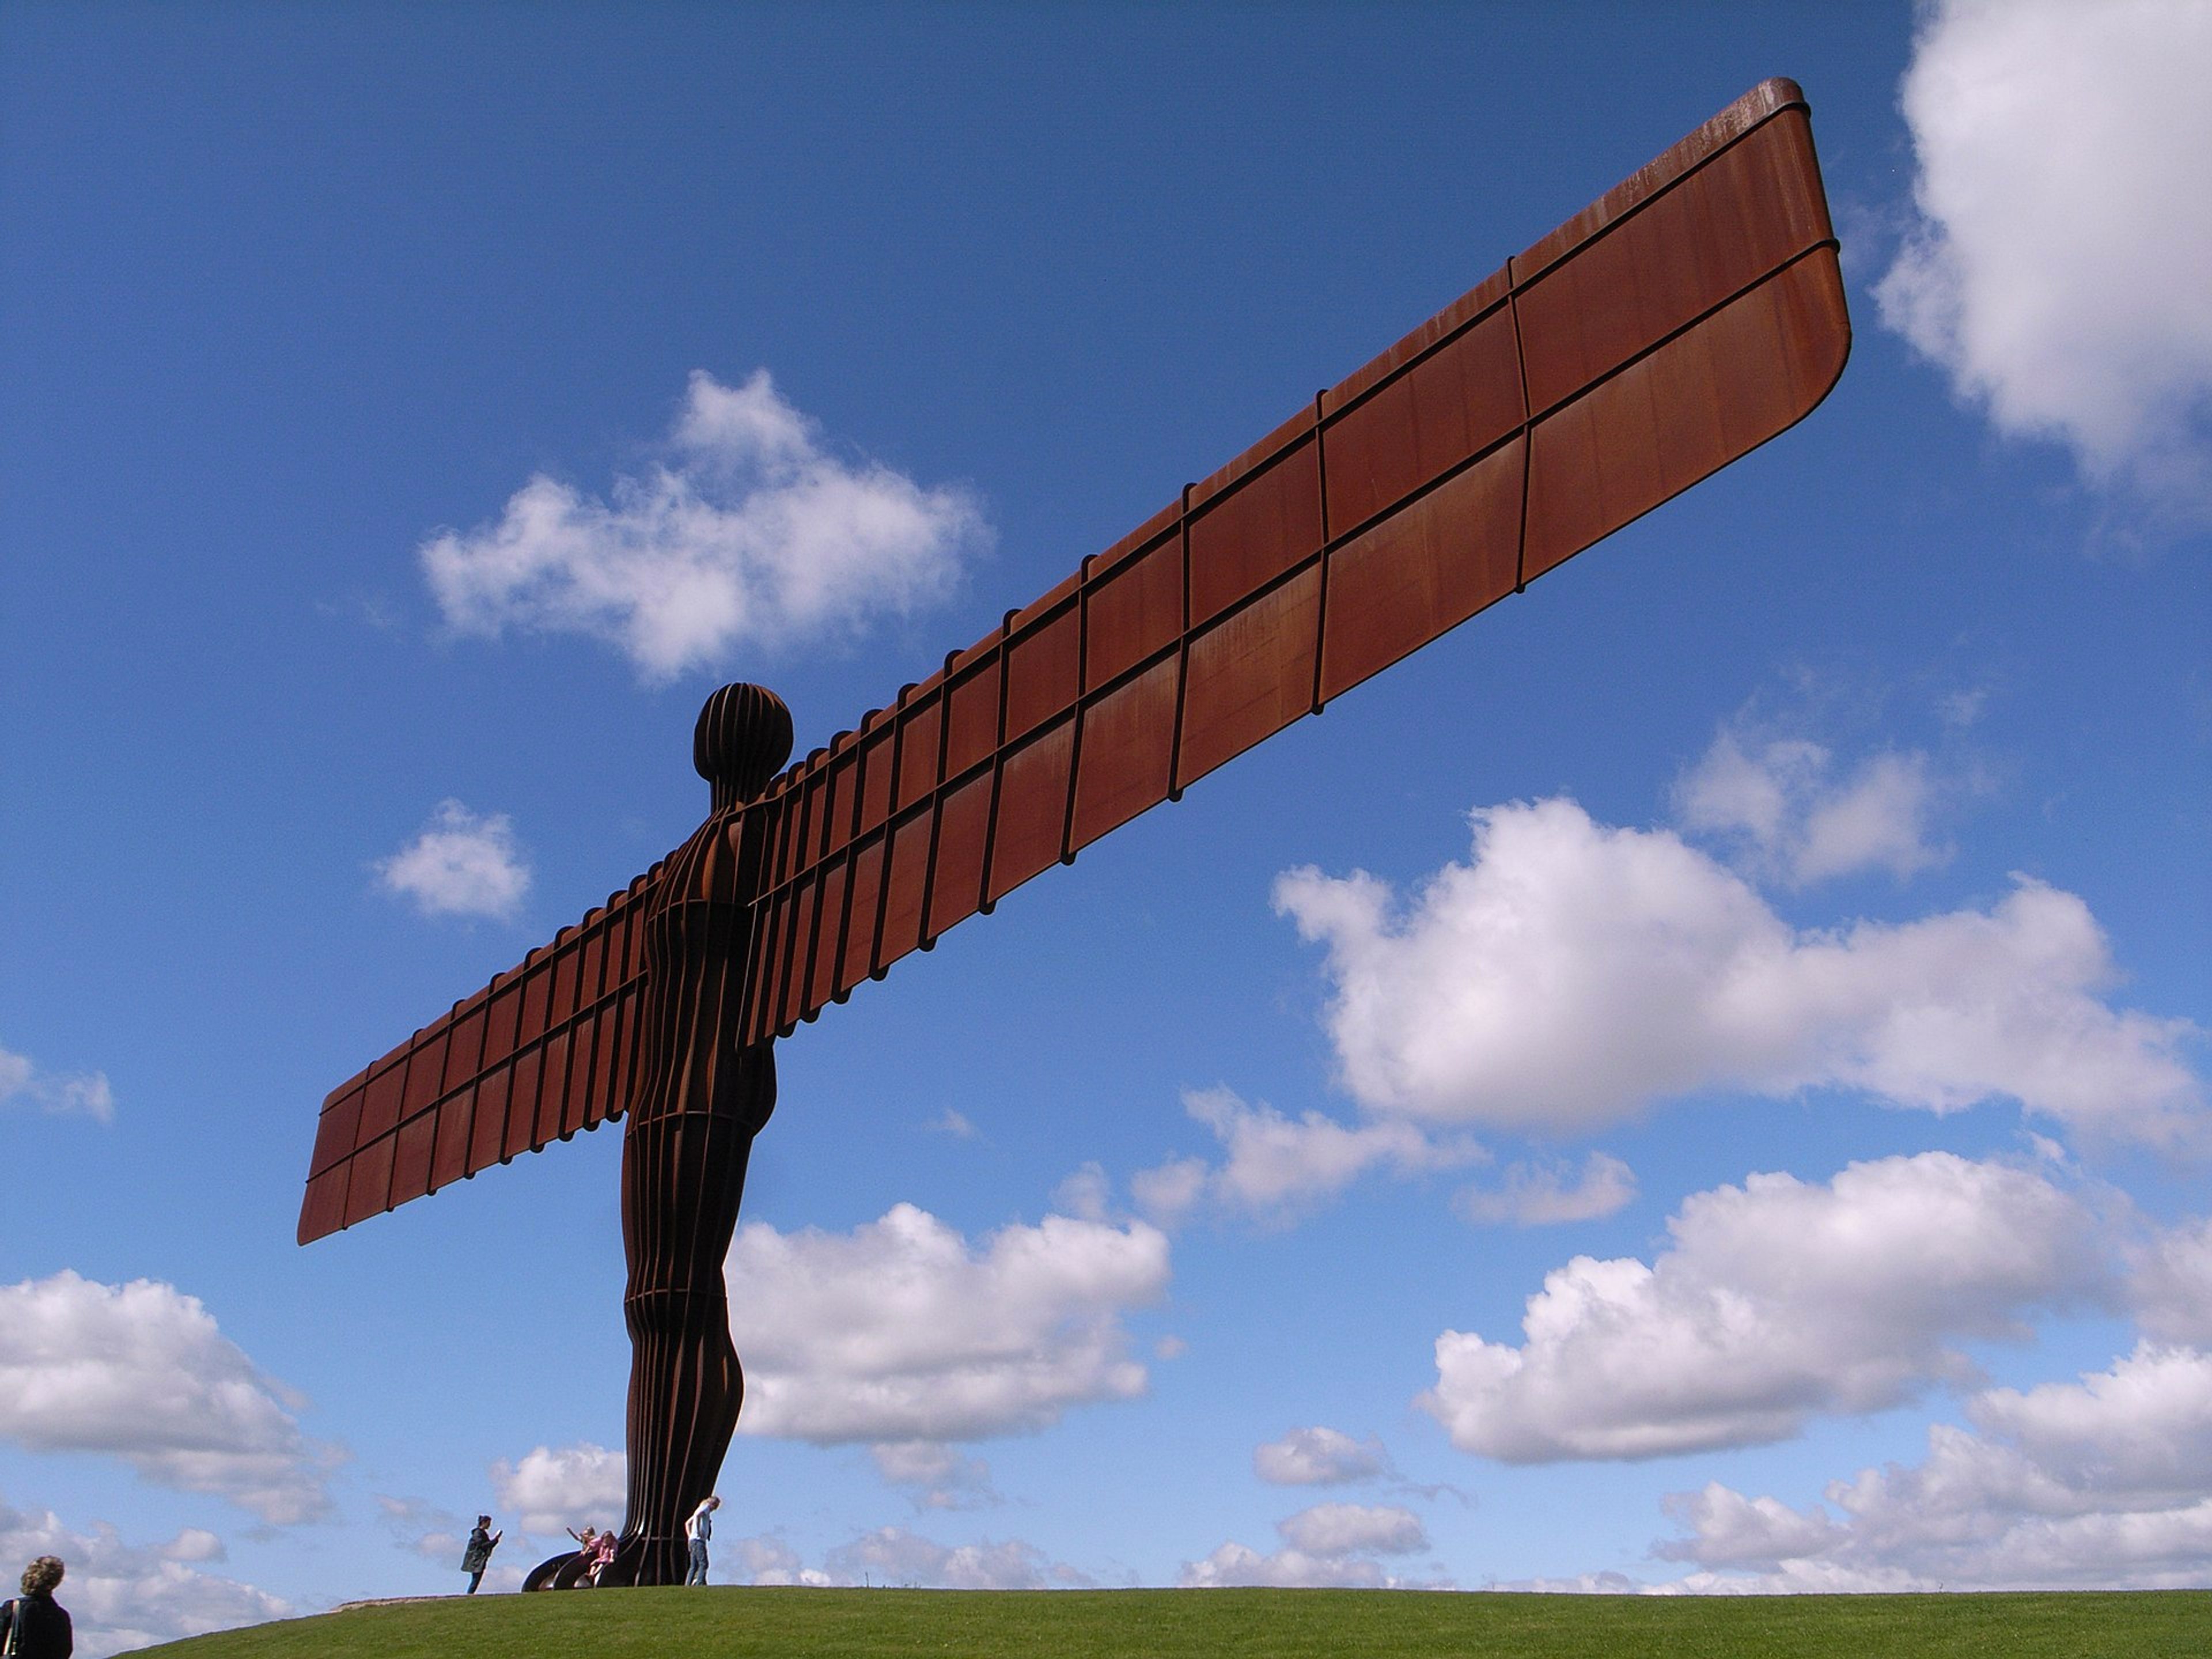 A photograph of Antony Gormley's giant Angel of the North sculpture, a human figure with giant wings for arms, against a sunny sky.